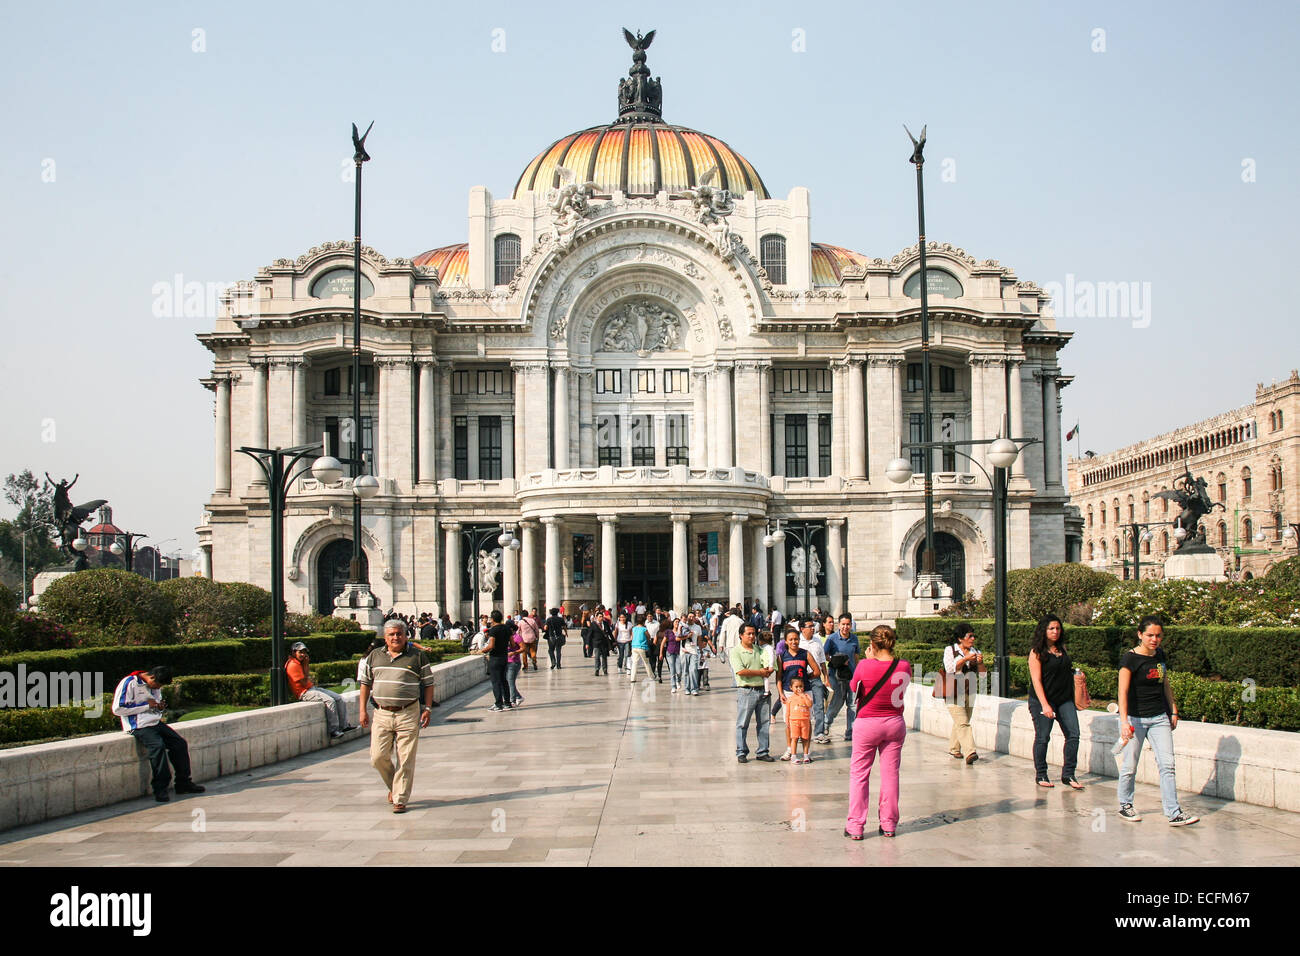 MEXICO CITY, Mexico, -MARCH, 3, 2012: Mexican people passing by the Palacio de Bellas Artes on march 3, 2012 in historical cente Stock Photo